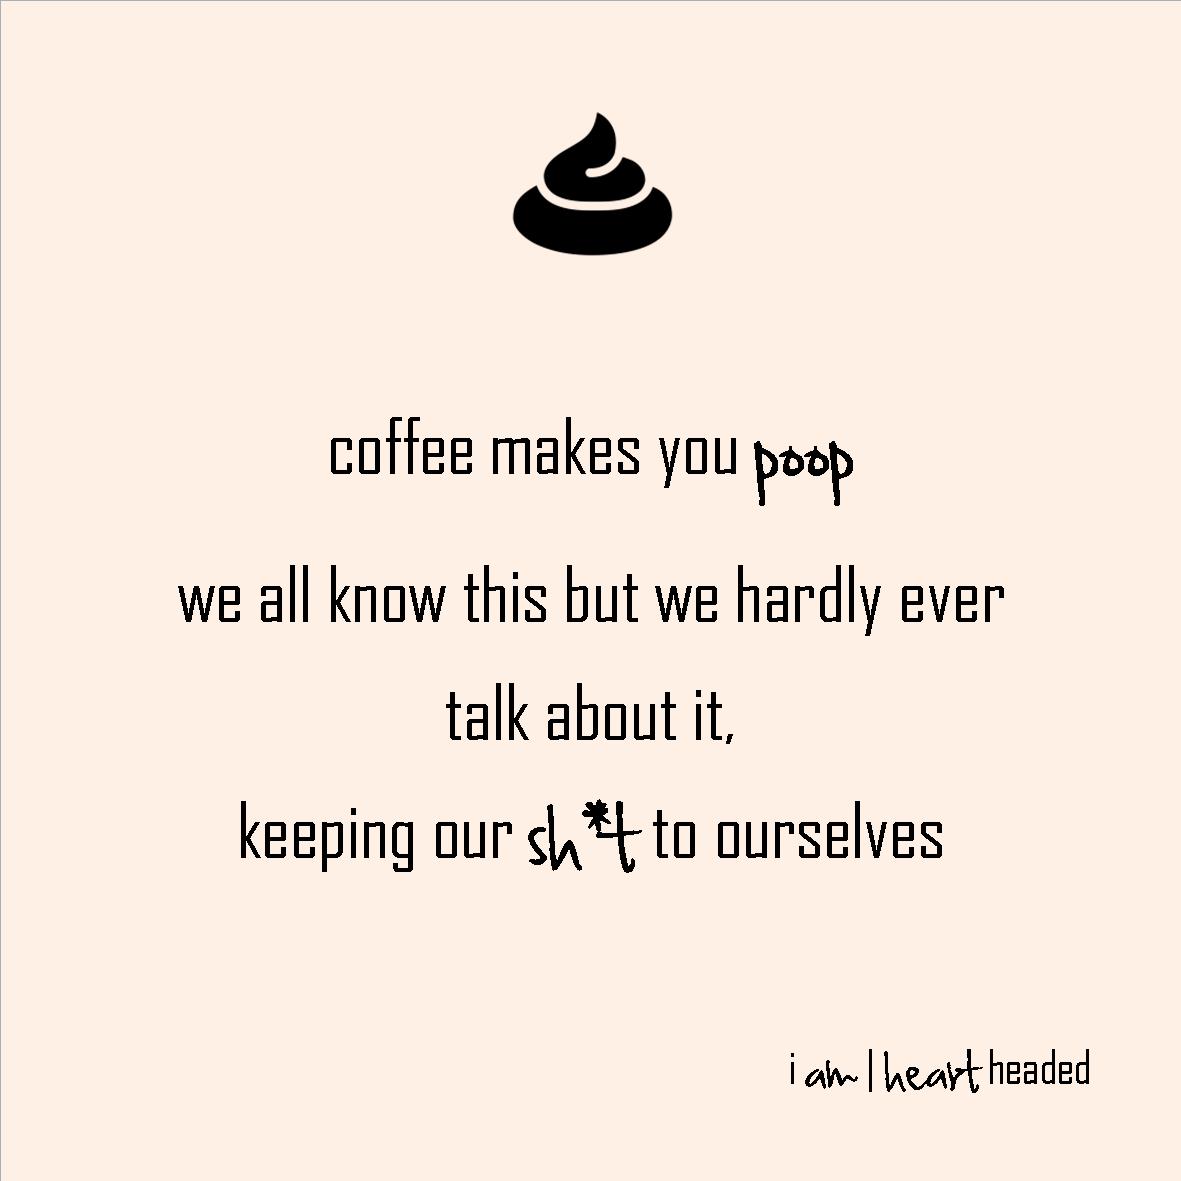 full-size featured image of quote 'coffee makes you poop' in category 'irony' at i am | heart headed